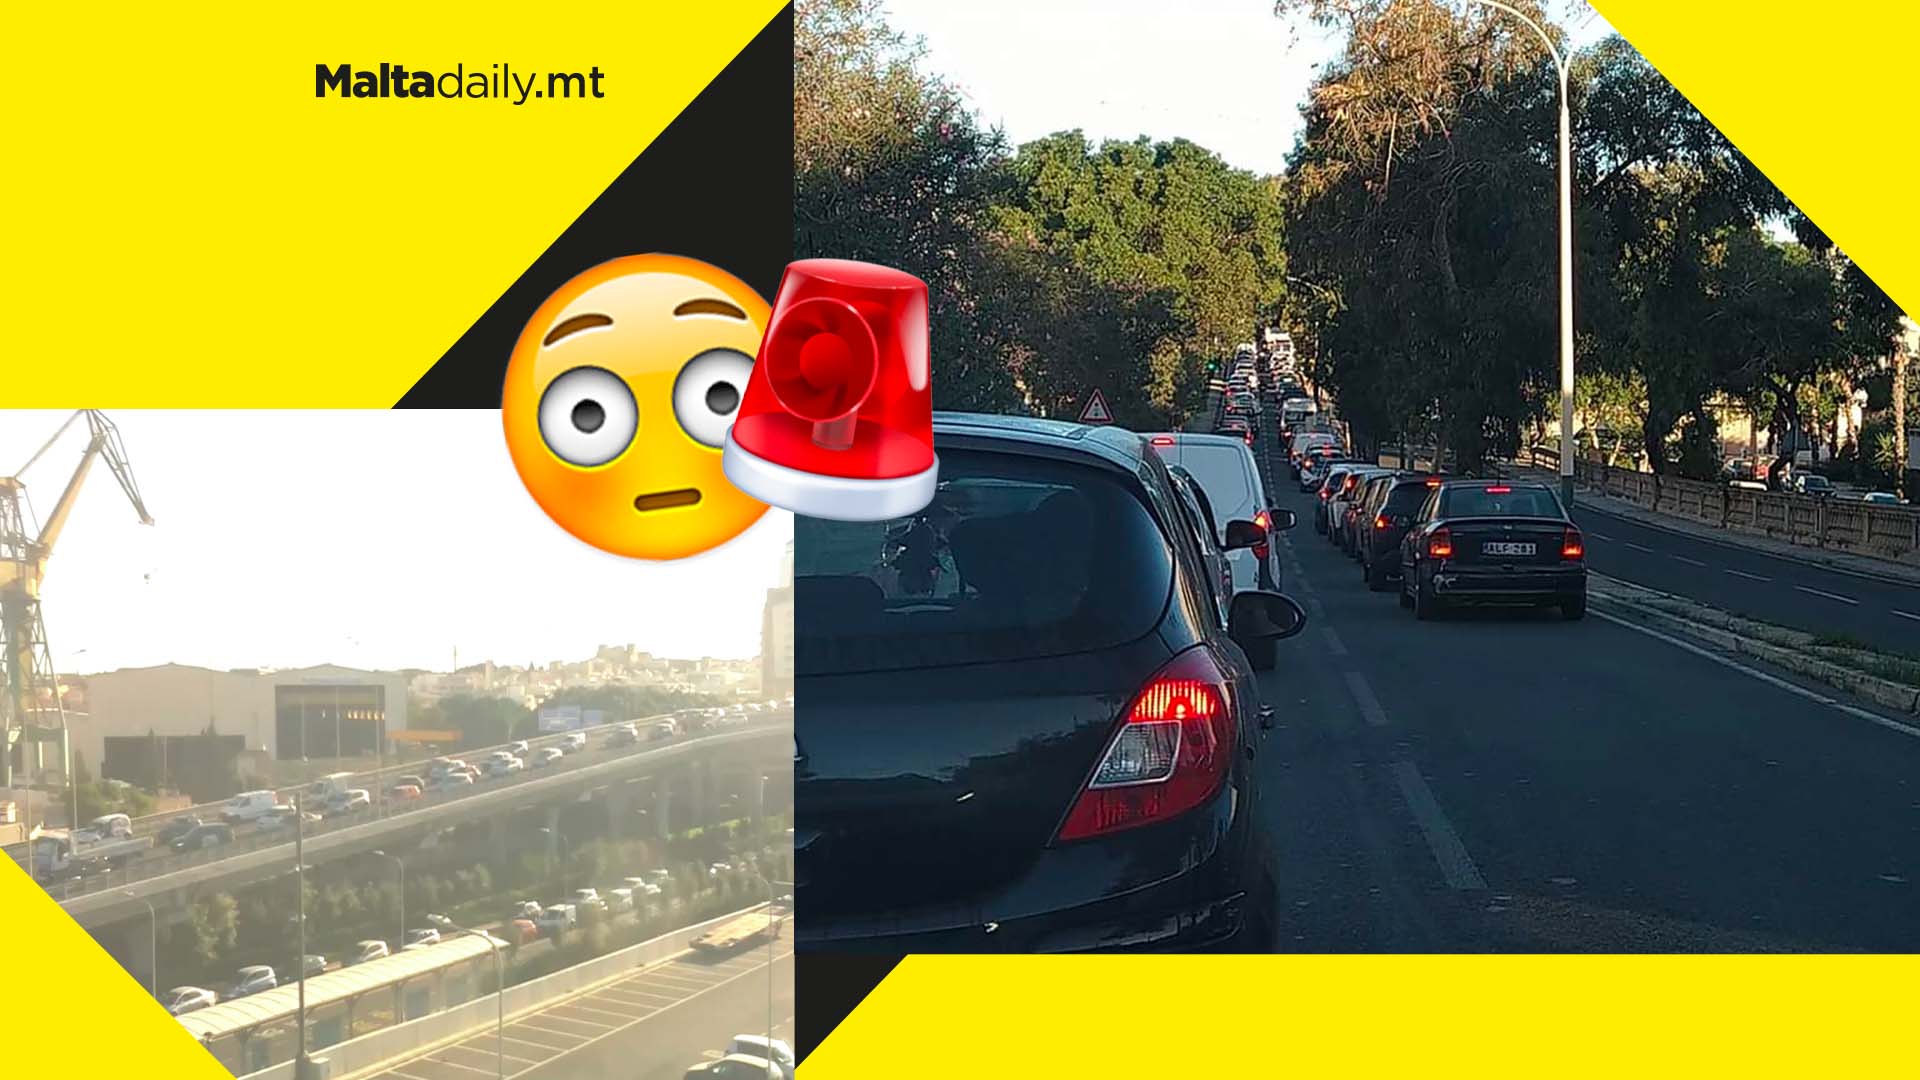 Traffic jams and accidents cause major delays all over Malta